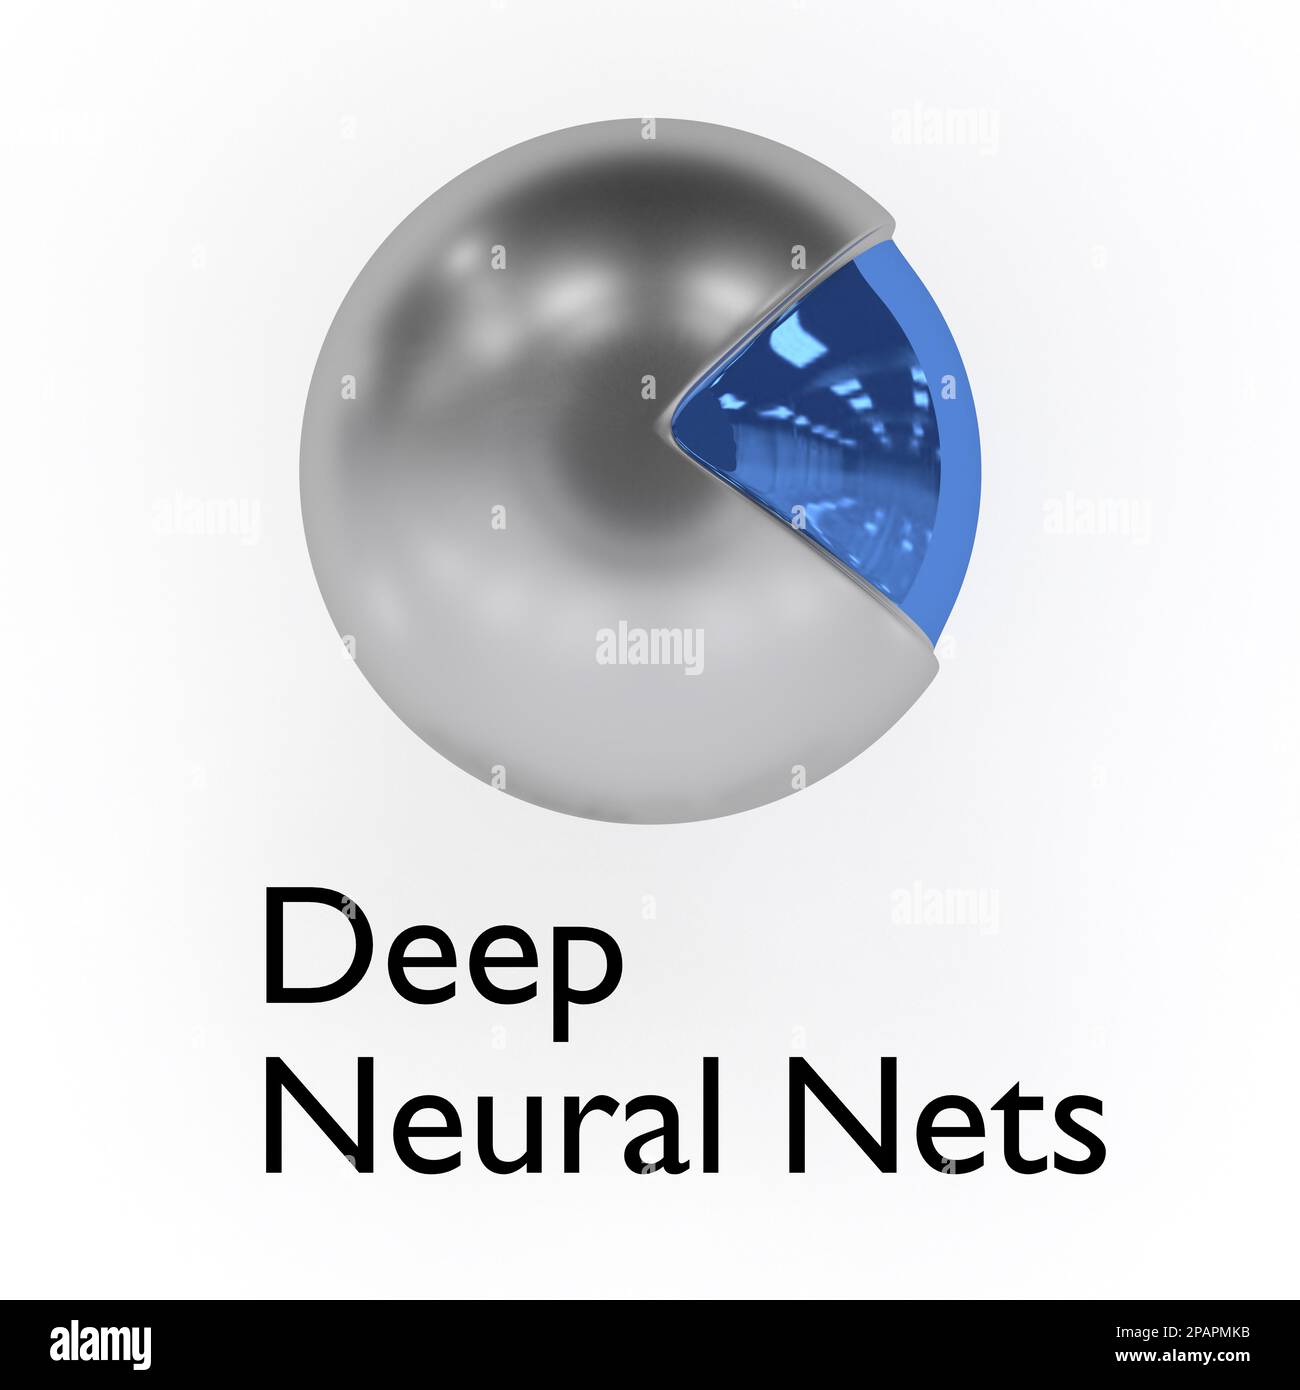 3D illustration of a robot head with the text Deep Neural Nets, isolated on gray. Stock Photo